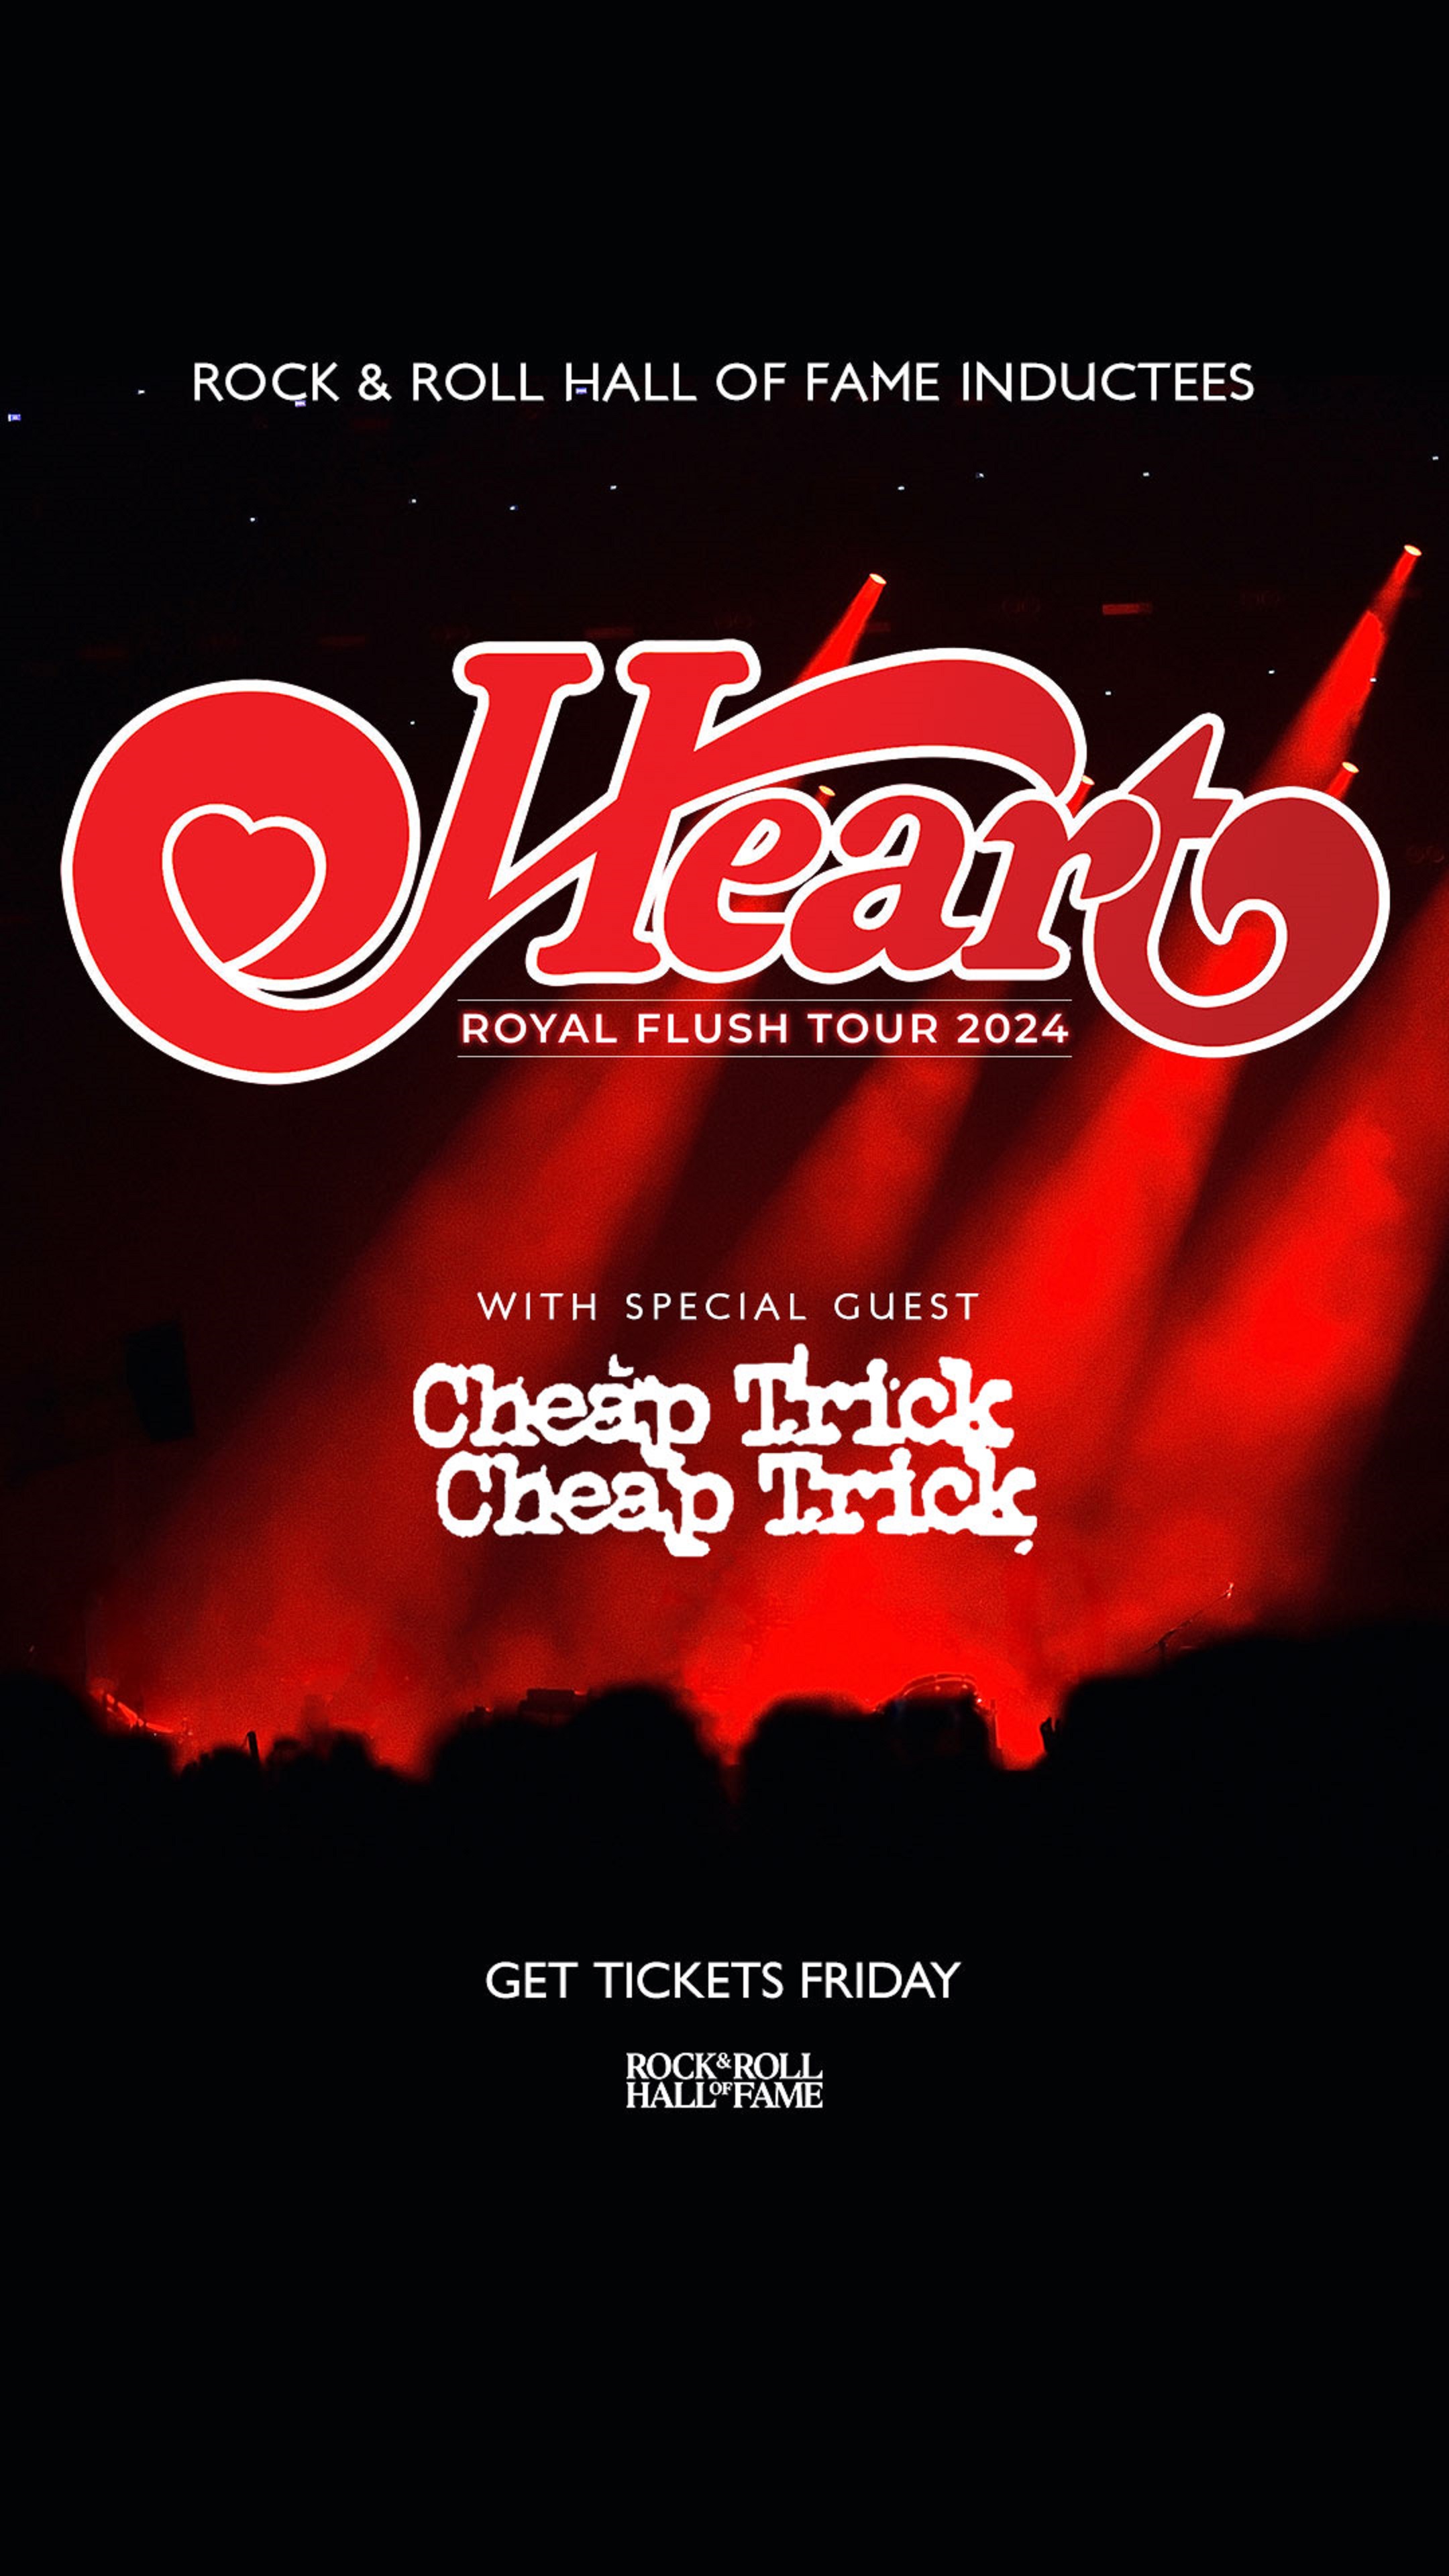 HEART Announces Long-Awaited Royal Flush Tour 2024 Dates Across North America and Beyond